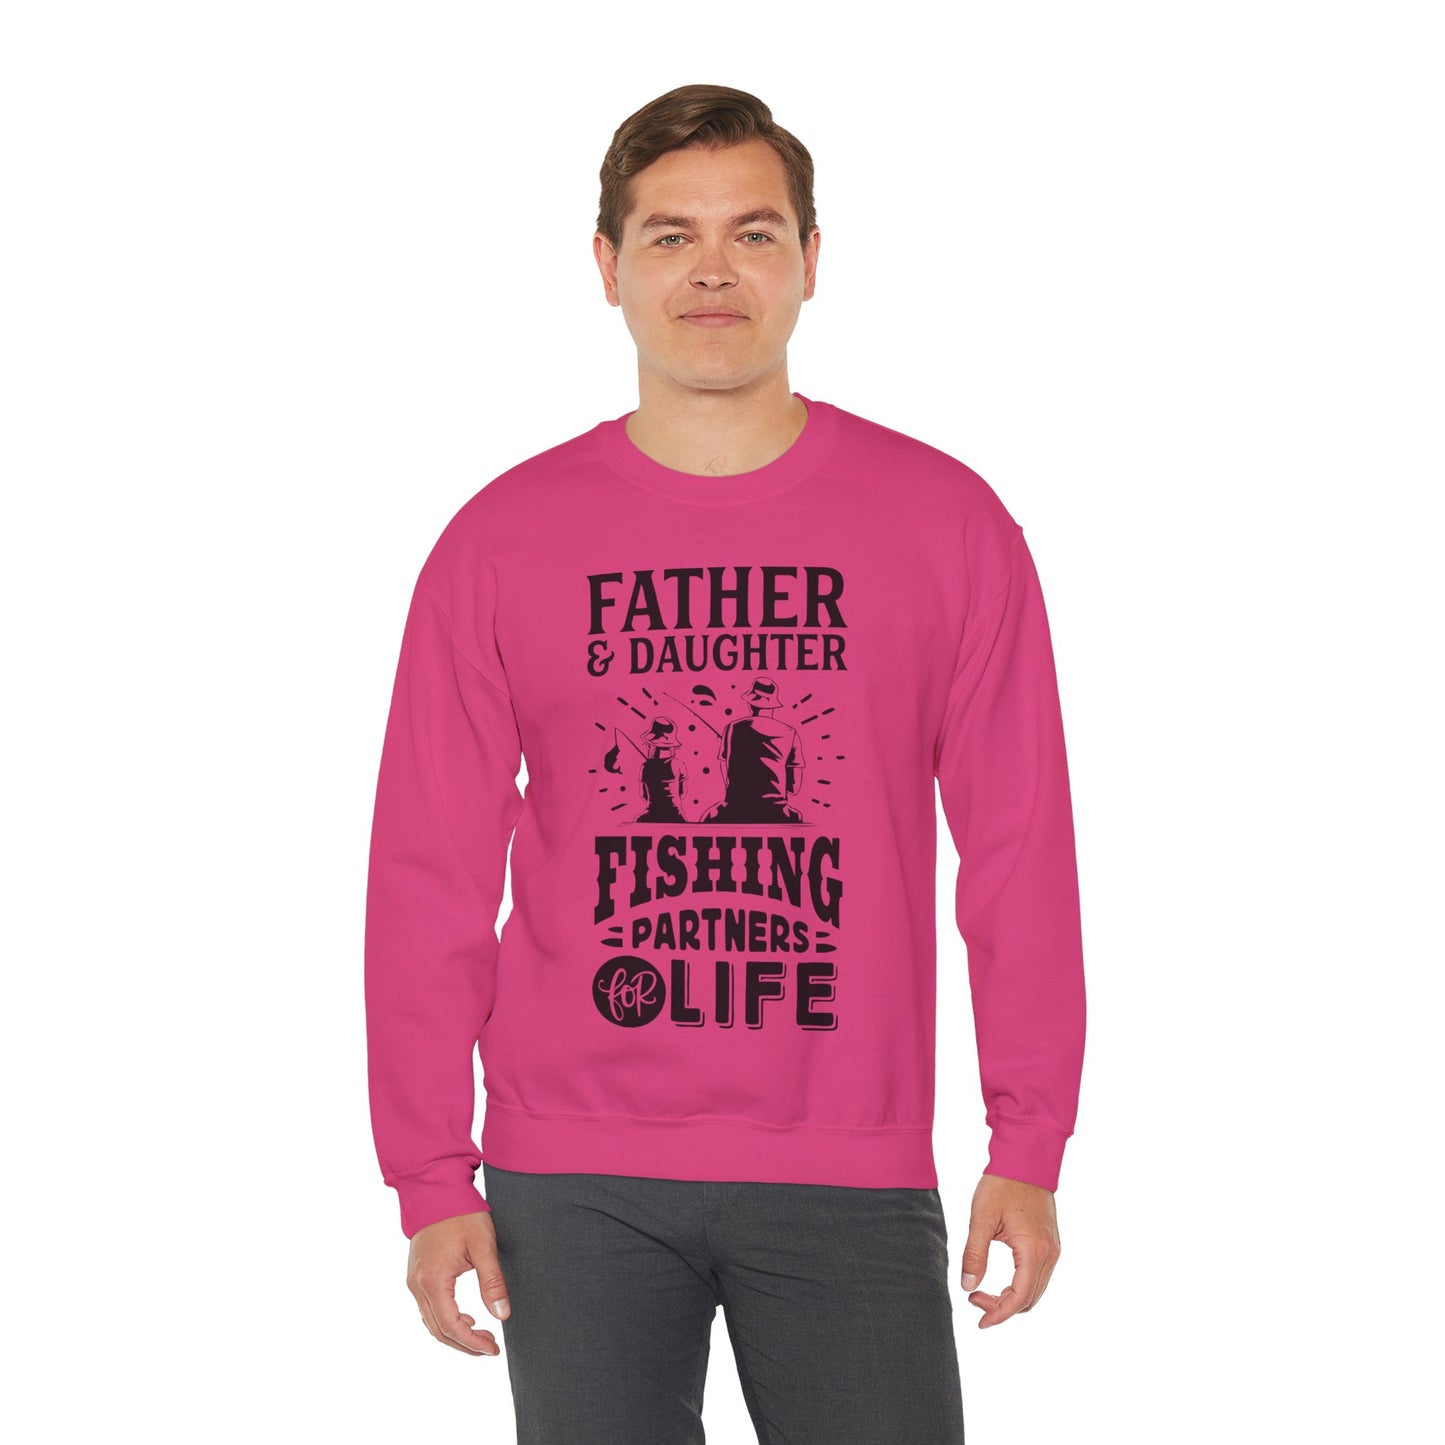 Father and Daughter for life - Unisex Heavy Blend™ Crewneck Sweatshirt